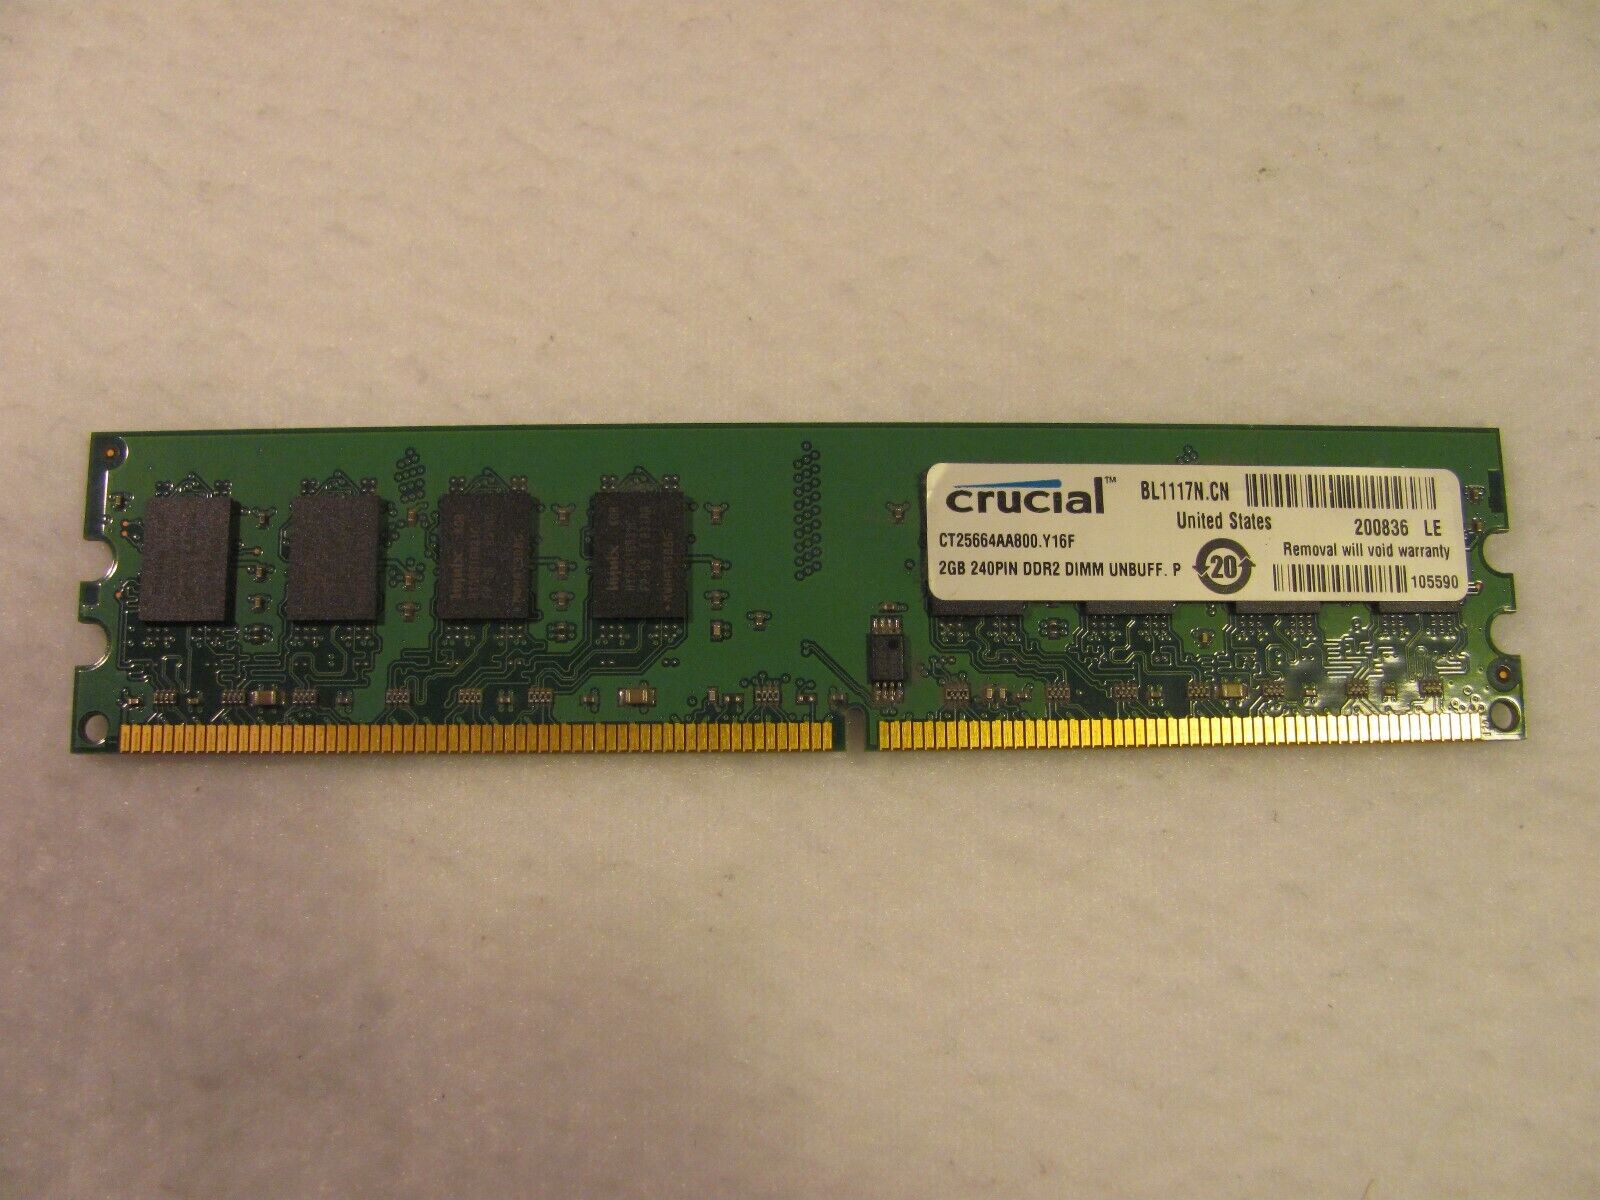 2 GB PC2-6400 DIMM DDR2 Memory (Crucial CT25664AA800, made in USA)